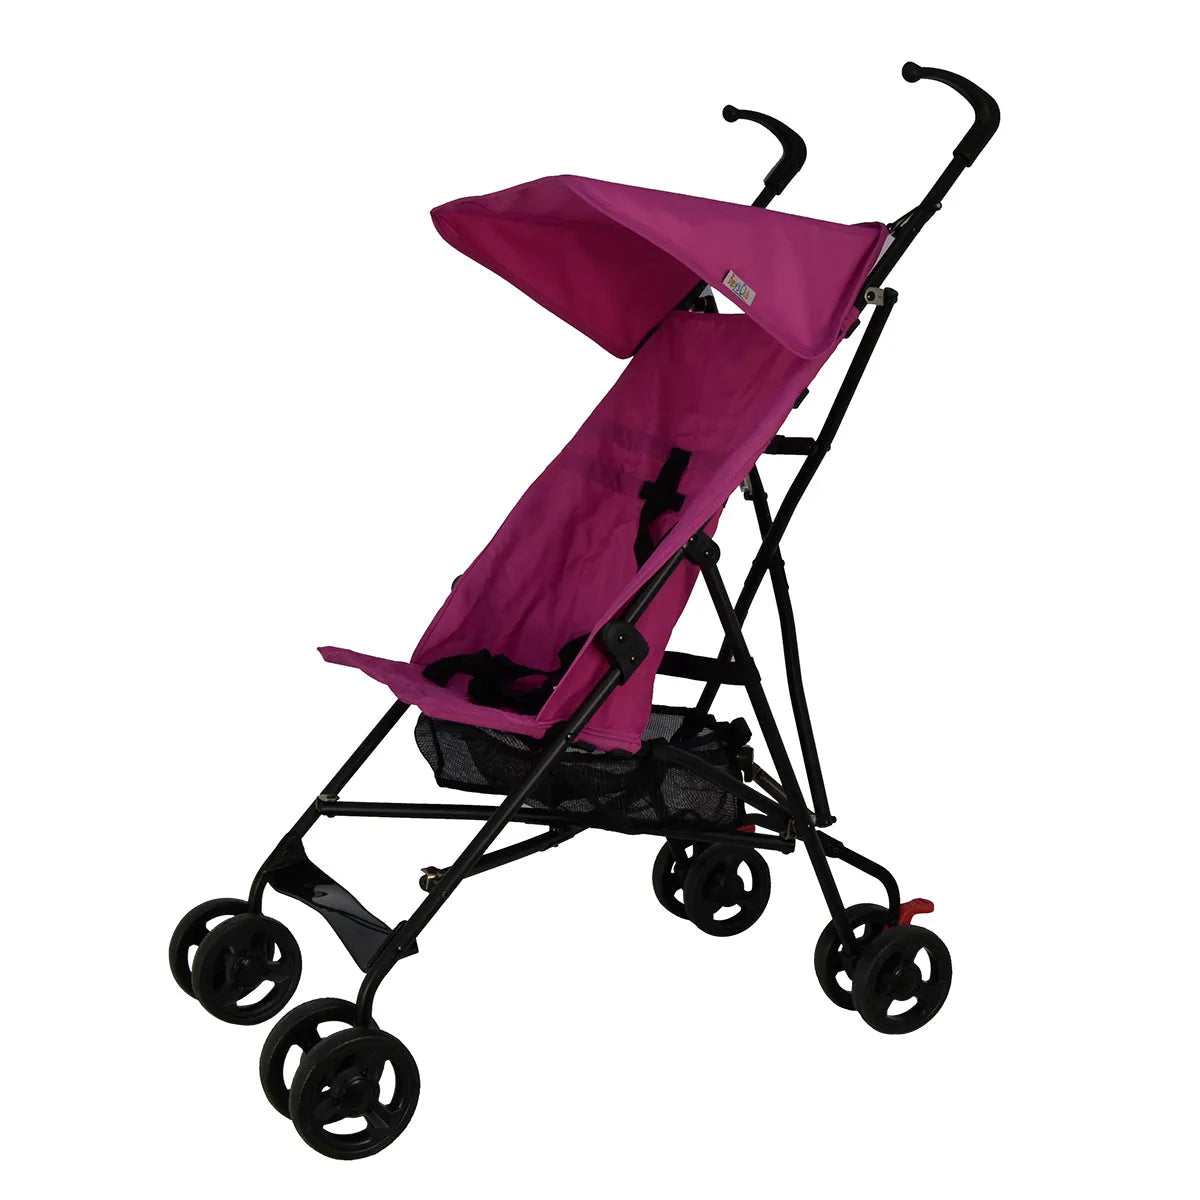 Baby's Club Umbrella Stroller With Canopy (Pink)